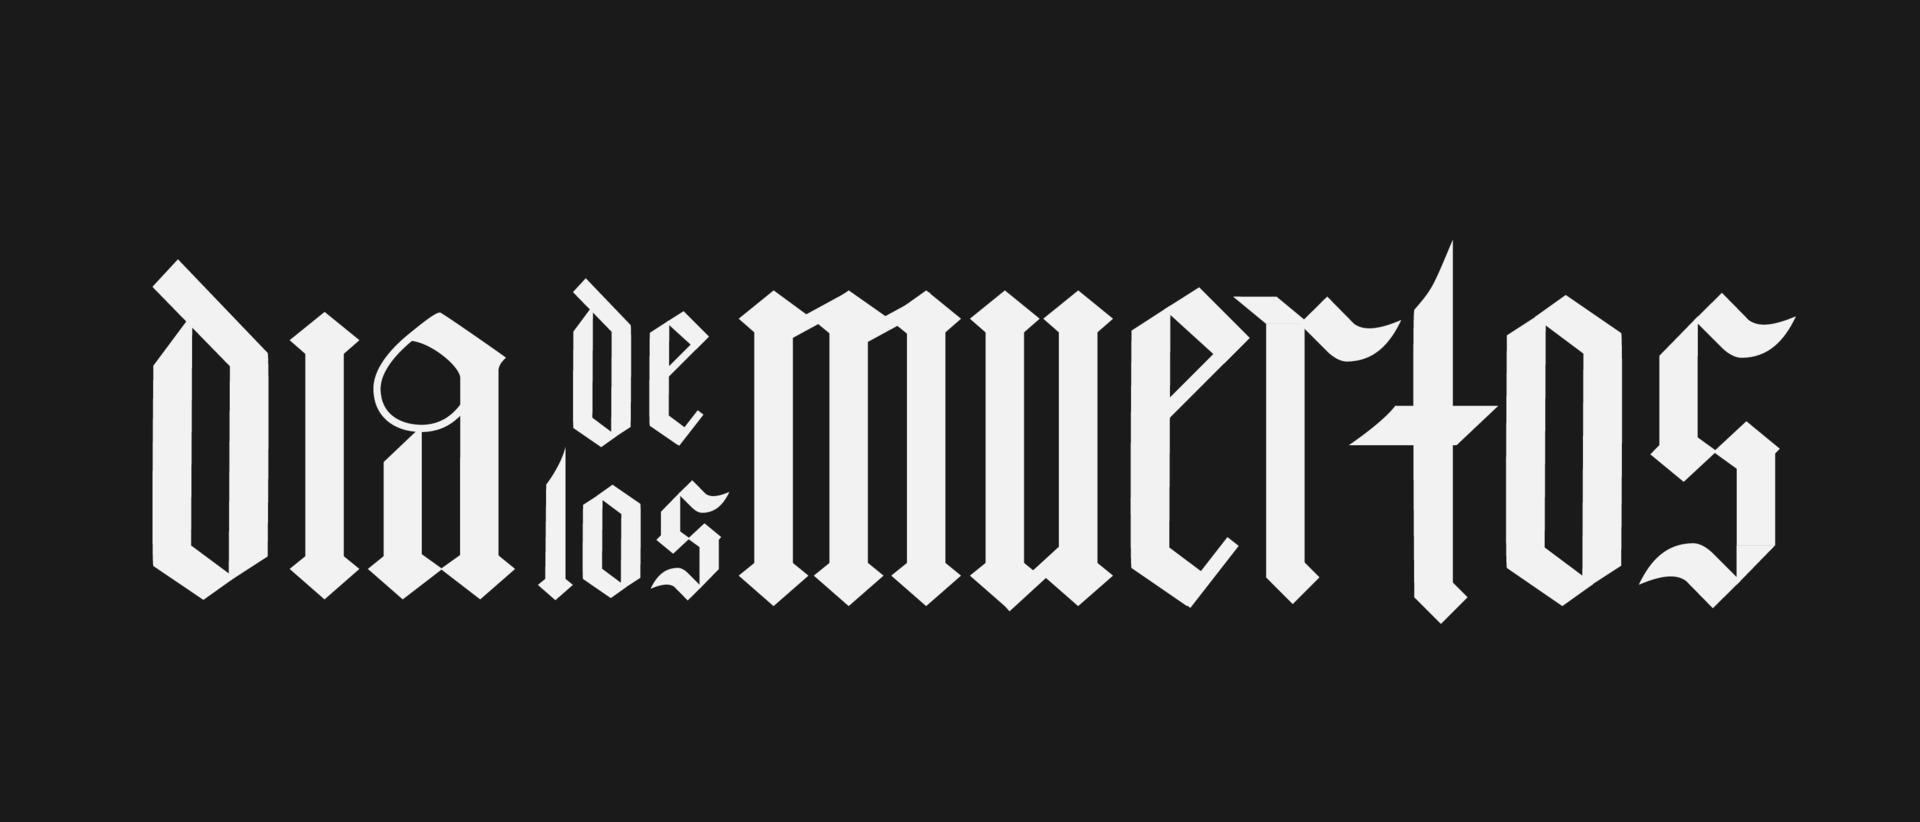 Dia de los Muertos fraktur font gothic lettering on black background. Mexican holiday Day of the Dead typography poster. Easy to edit template for greeting card, banner, poster, t-shirt, invitation. vector